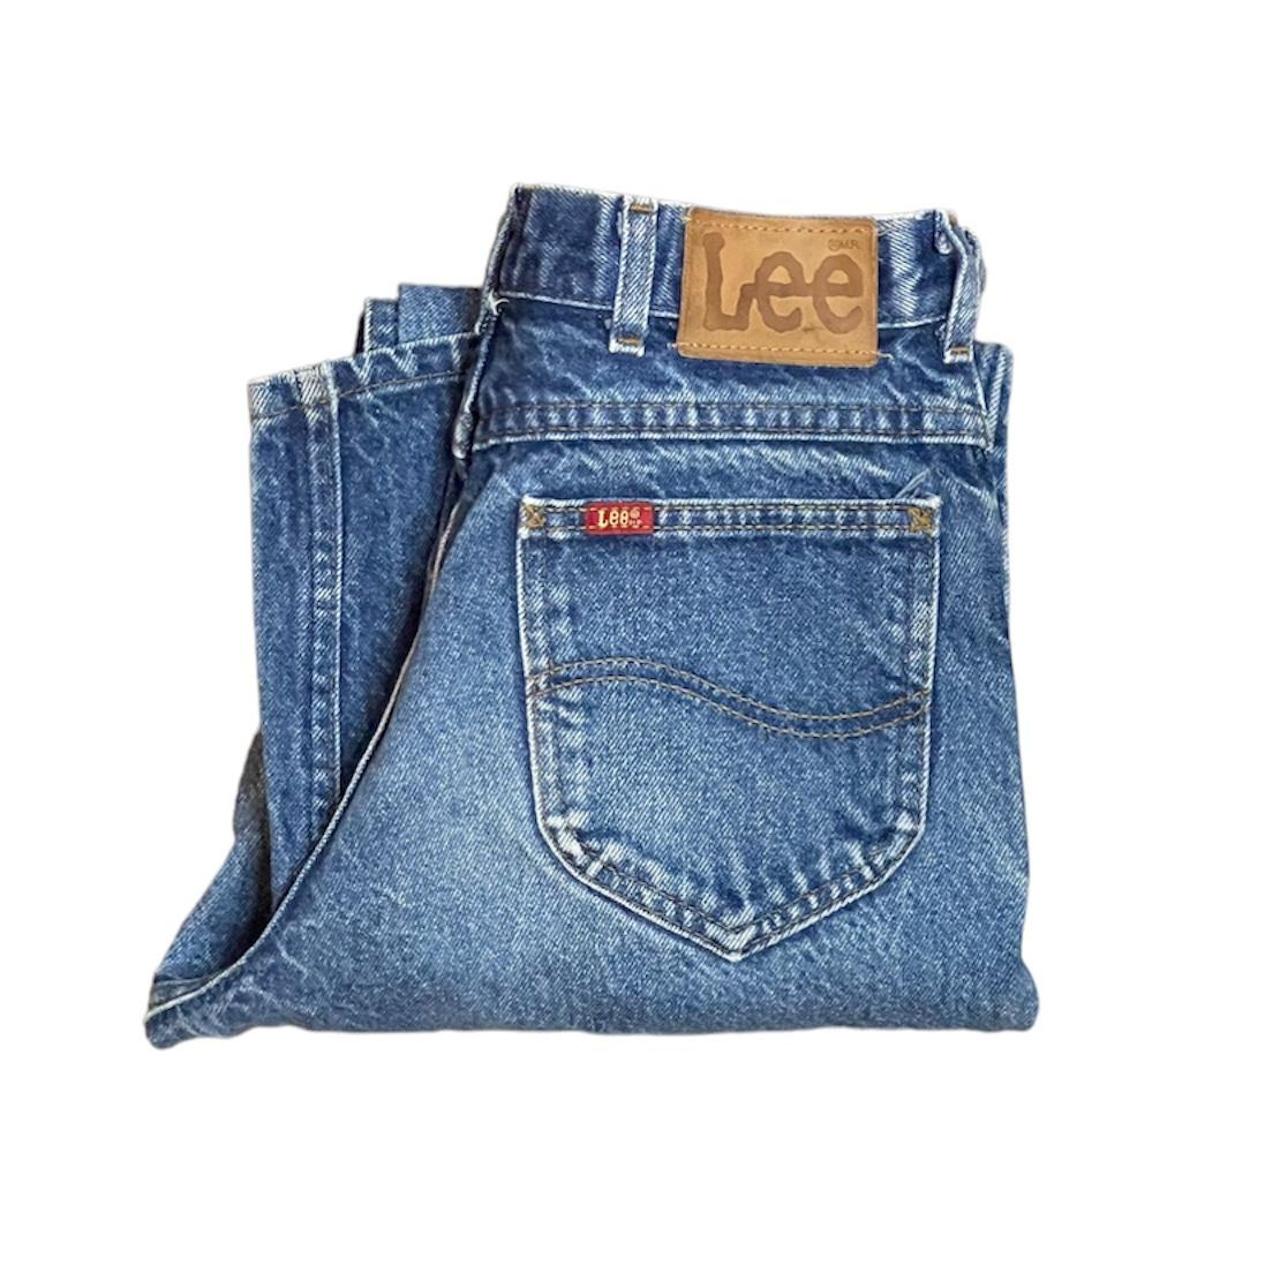 Classic LEE Jeans